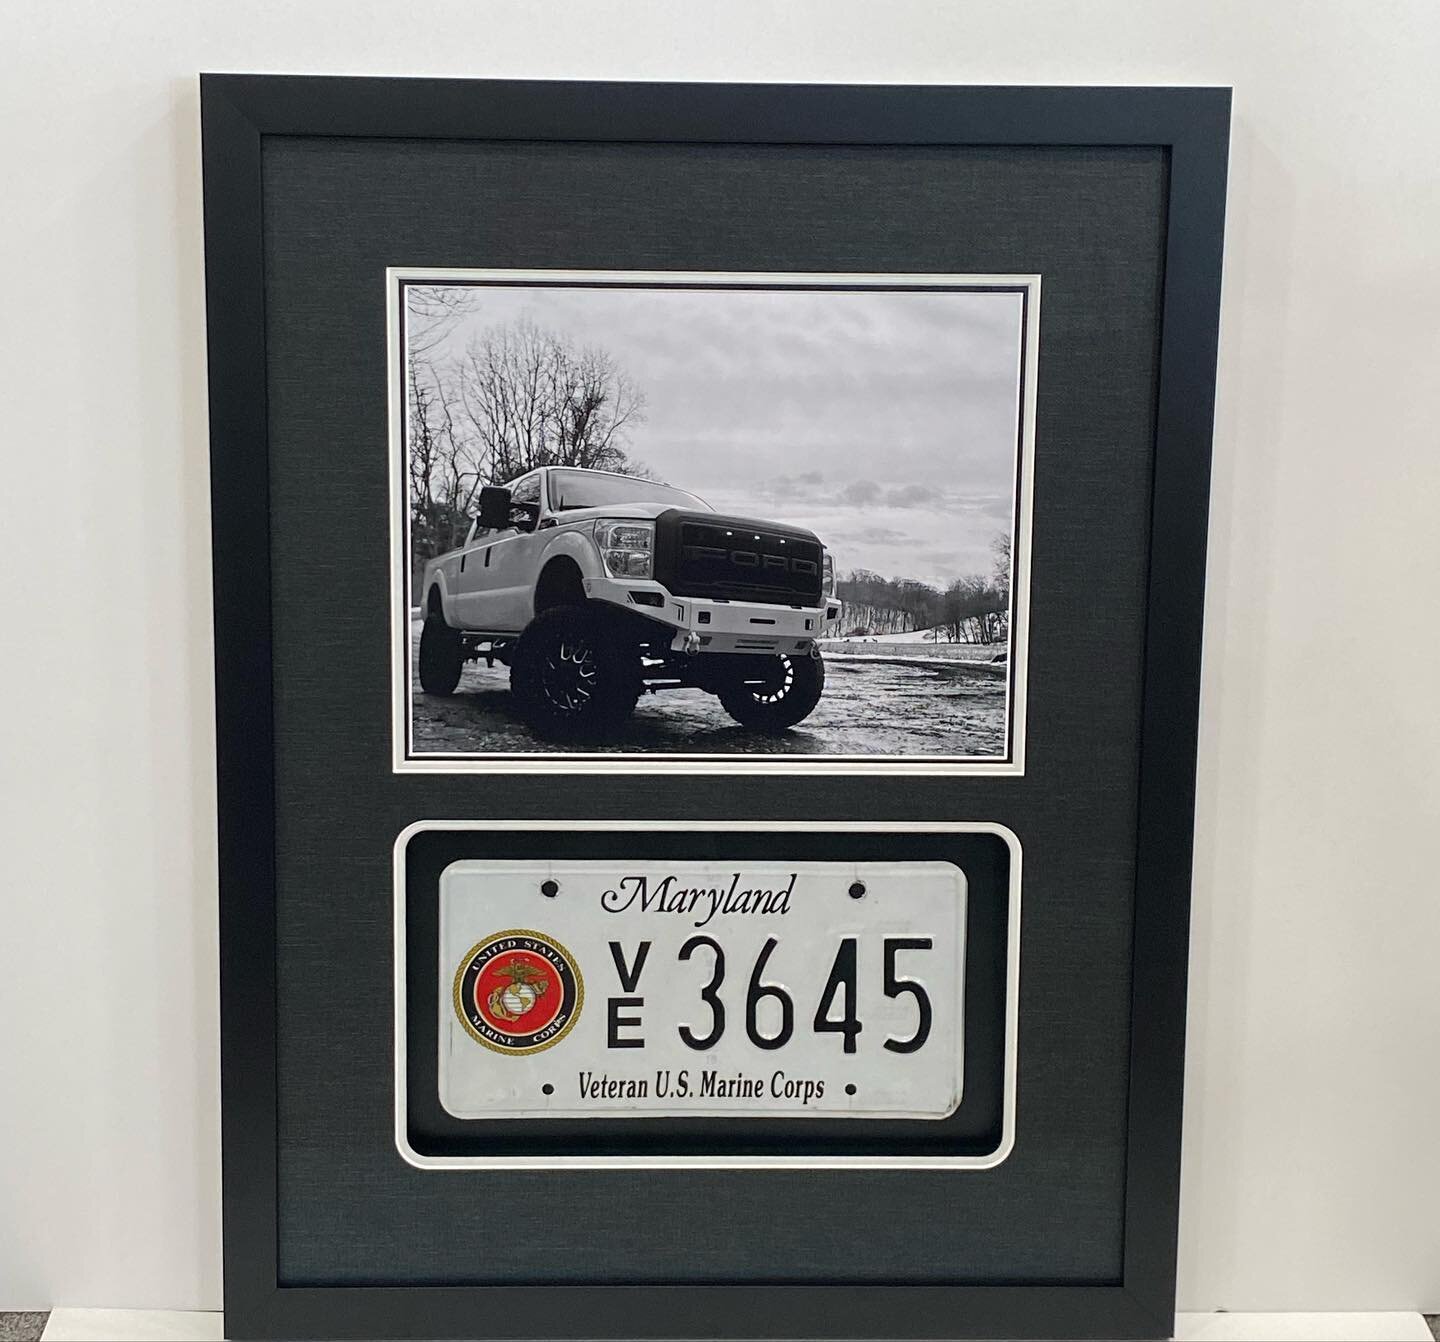 A boy and his truck! Textured black mat compliments the truck tires on this well captured photo. #capturingmemories #thanksforserving #smallbusiness #downtownbelair #imhereharford #harfordcounty #belairmd